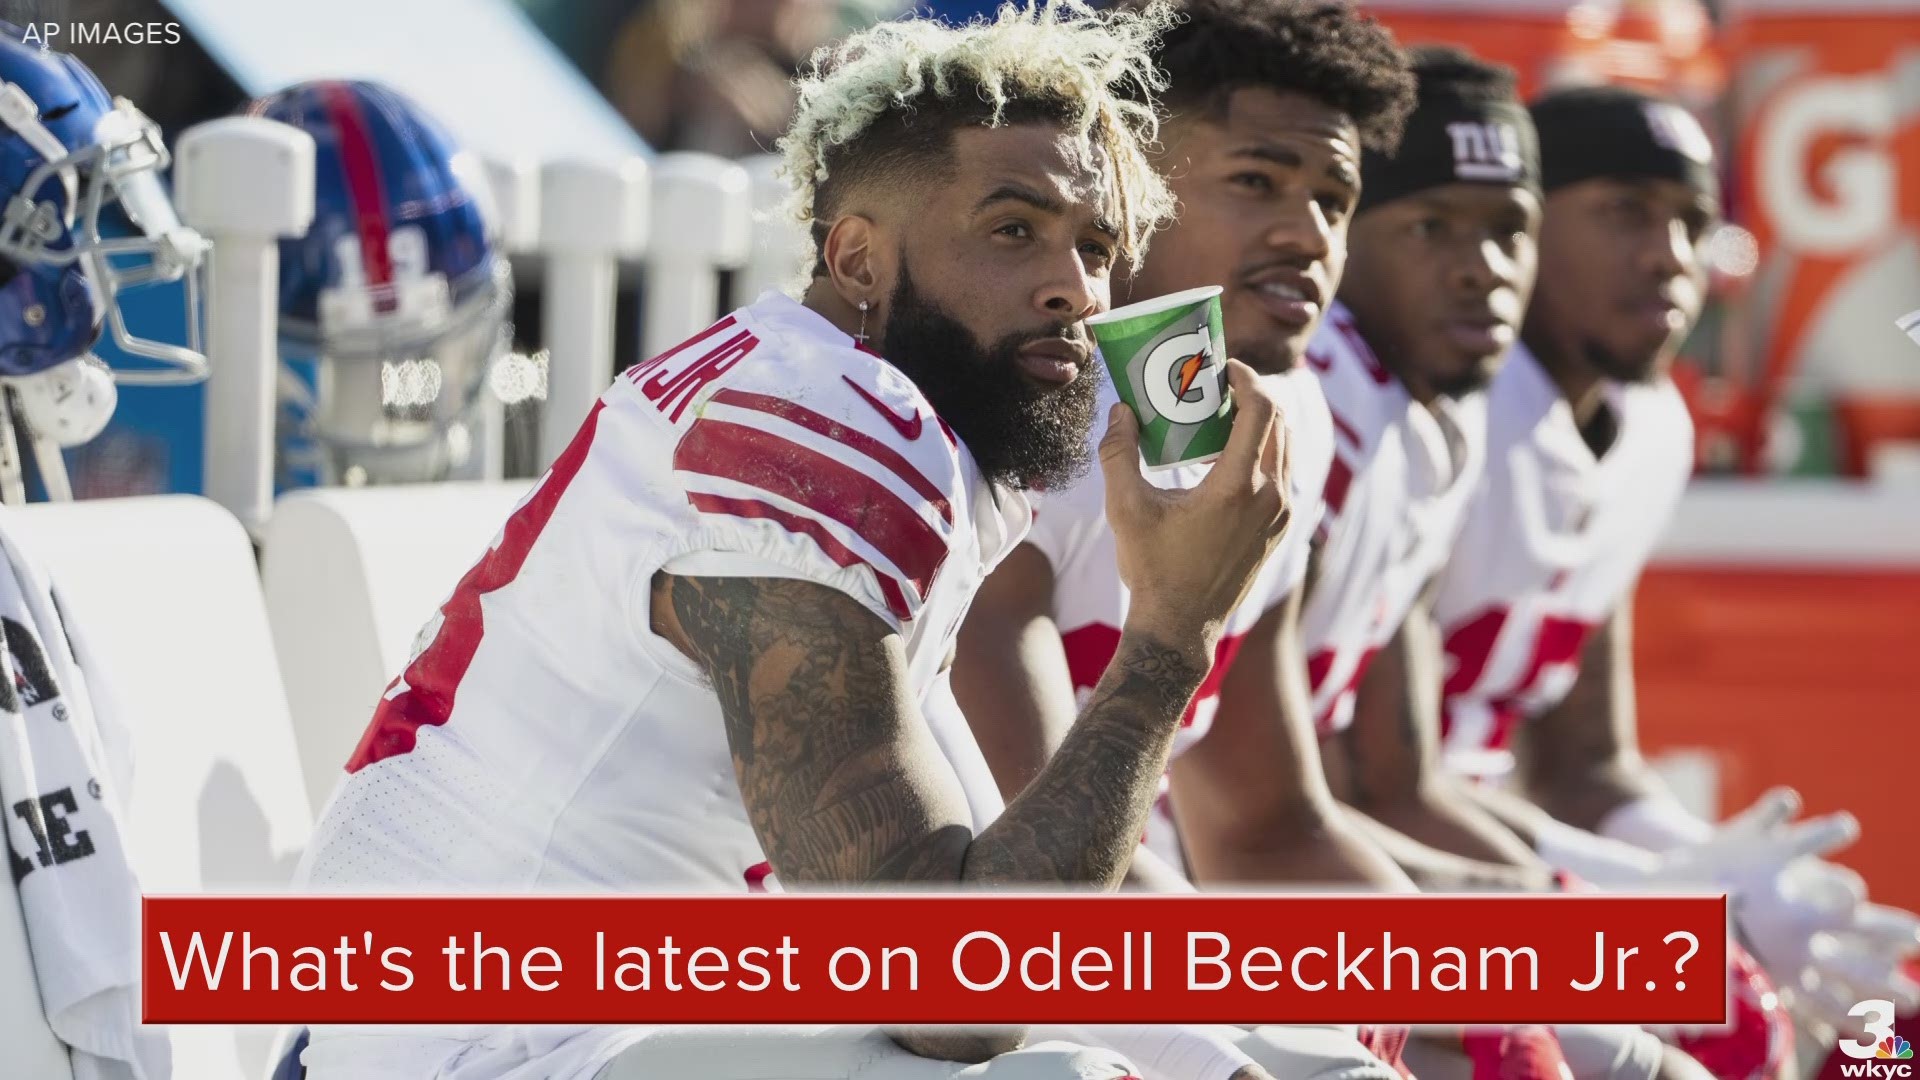 According to Bleacher Report's Matt Miller, should the New York Giants opt to trade Odell Beckham Jr., the Cleveland Browns are 'probably a front-runner' to land the 3-time Pro Bowl wide receiver.